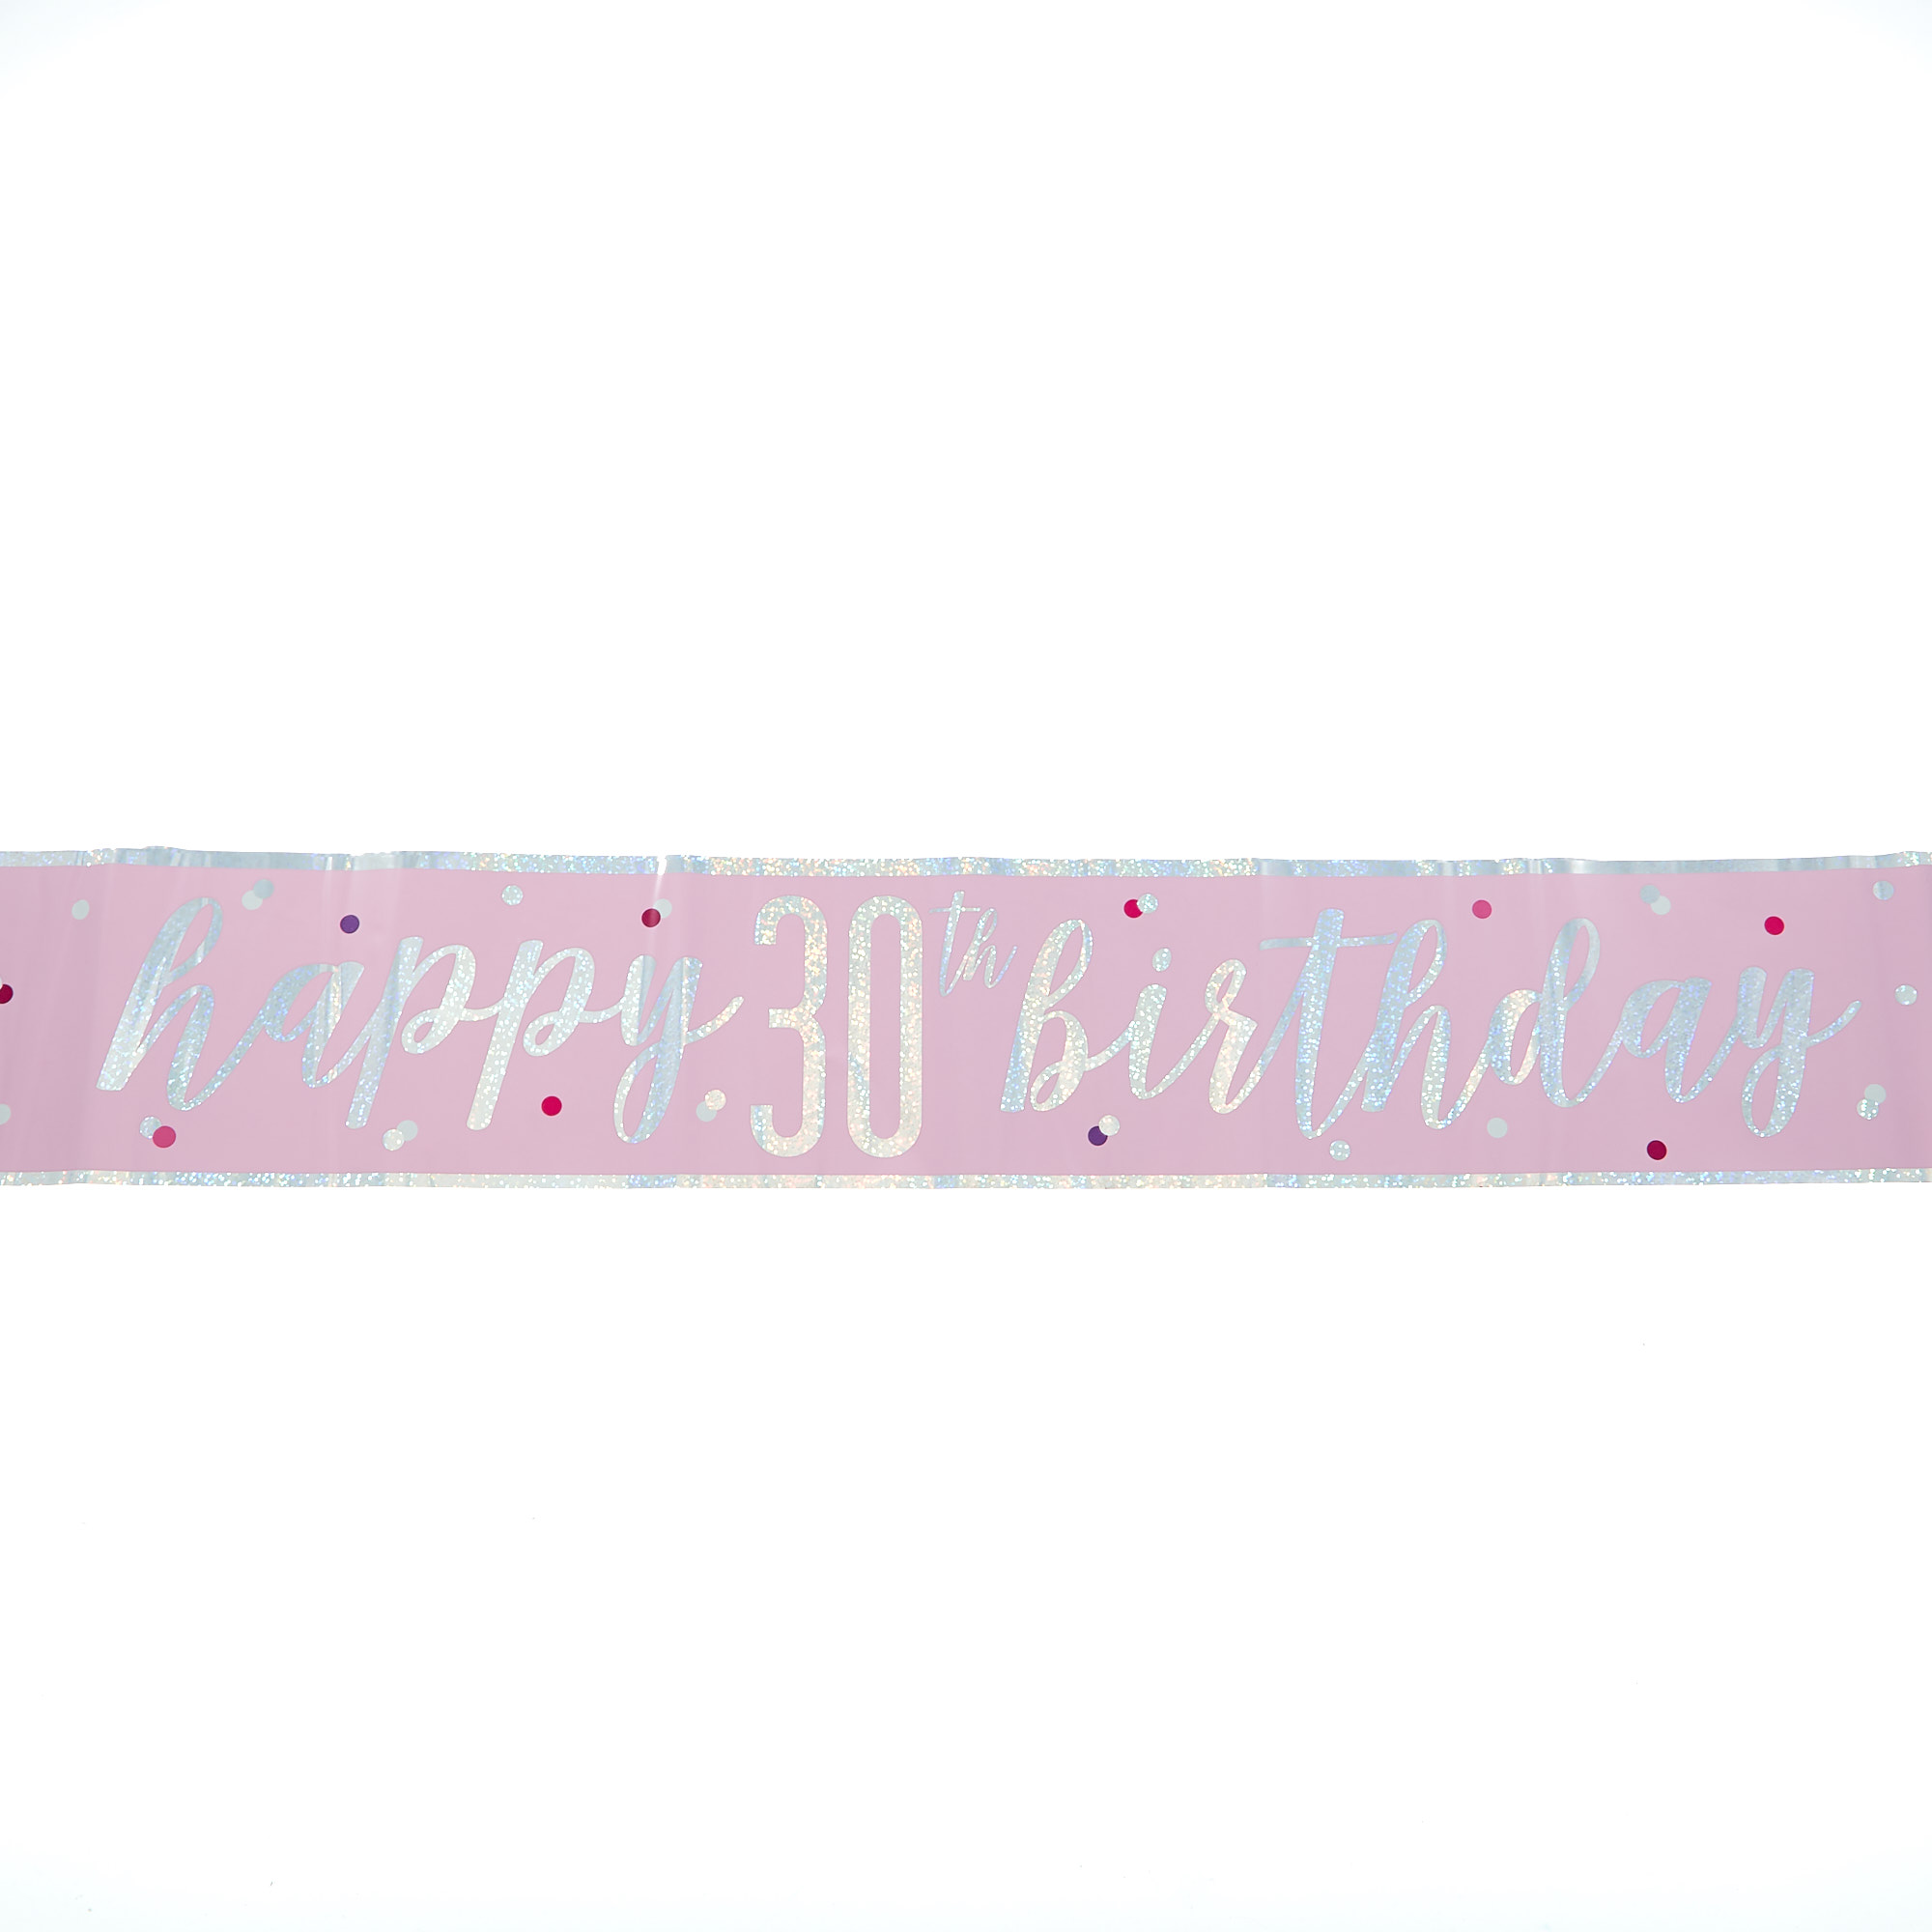 Pink 30th Birthday Party Accessories - 6 Pieces 